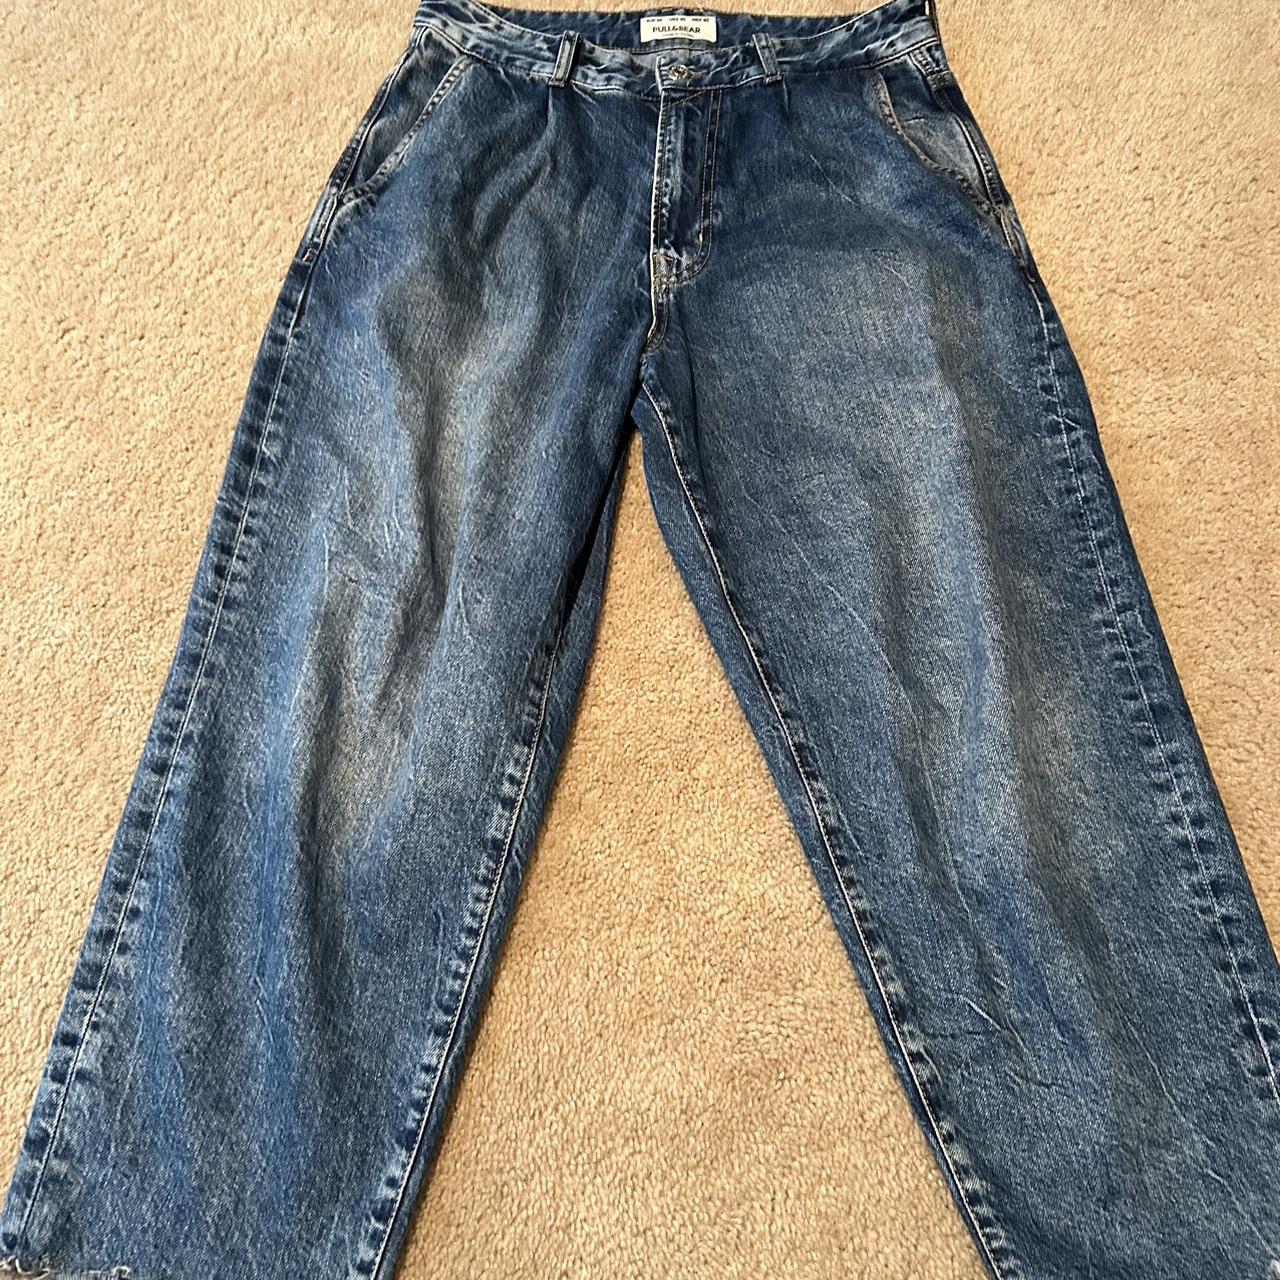 DARK BLUE FADED WASHED JEANS SUPER GREAT MATERIAL... - Depop